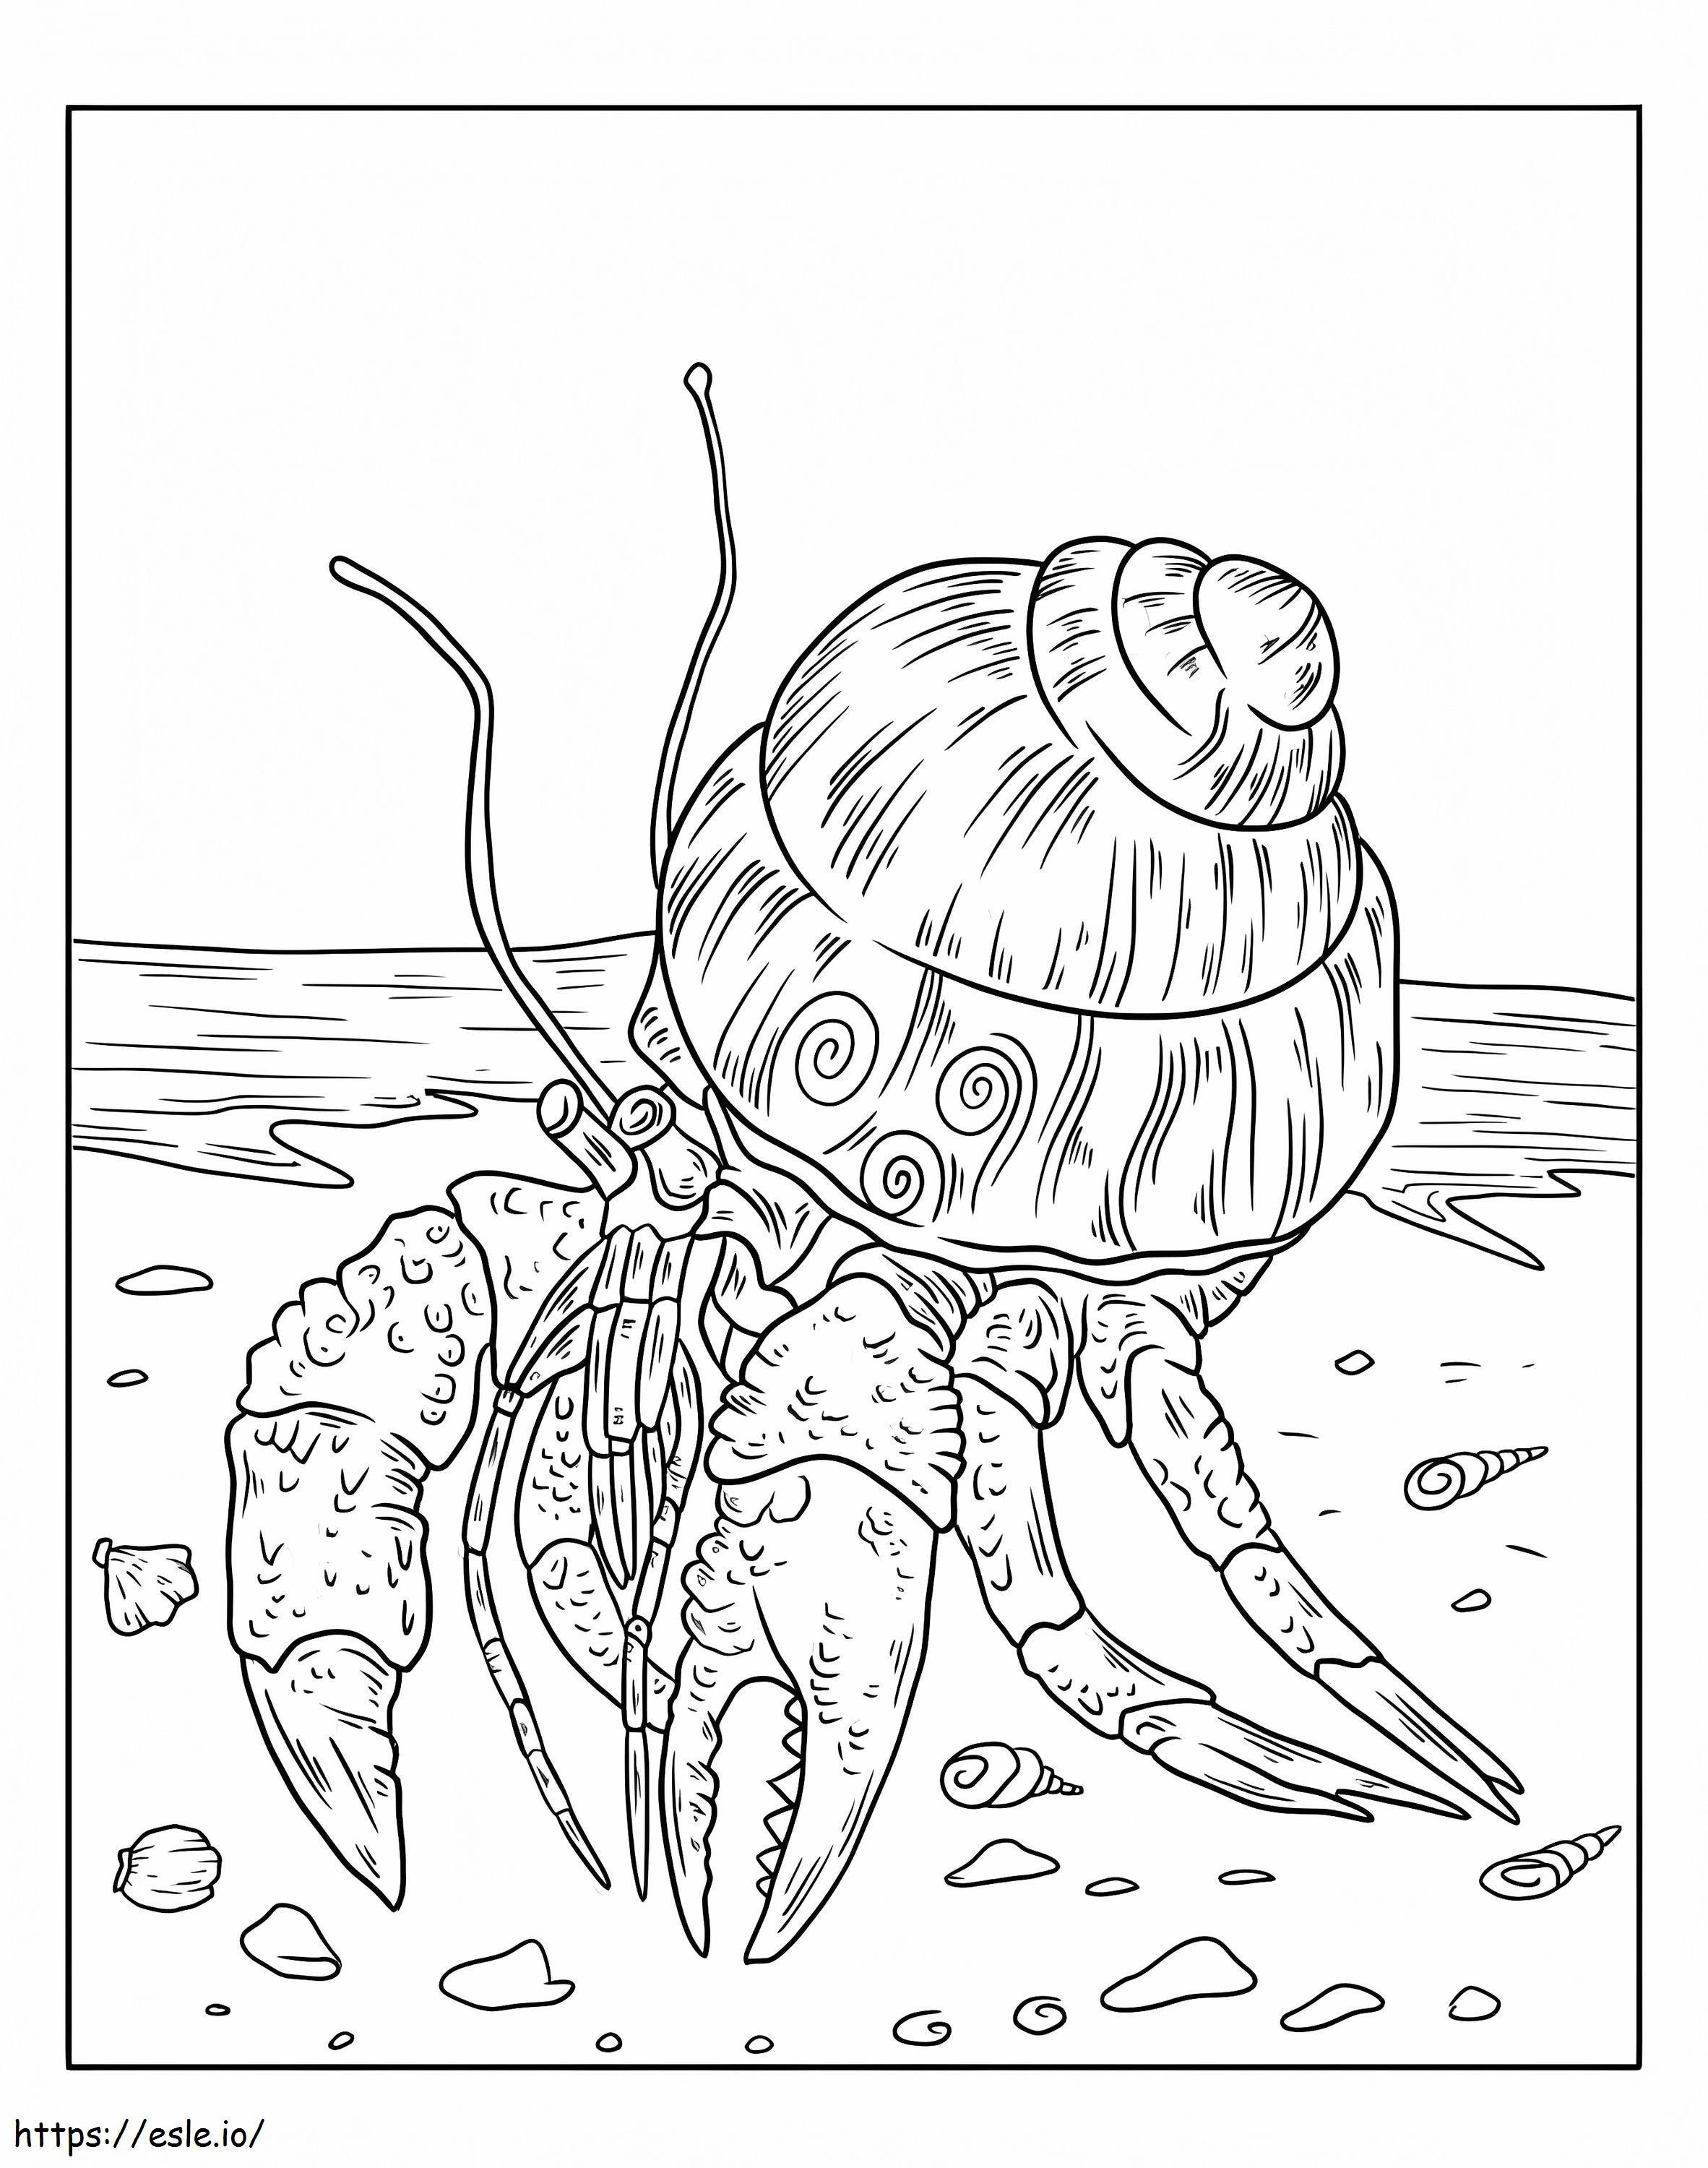 Hermit Crab Walking On The Beach coloring page